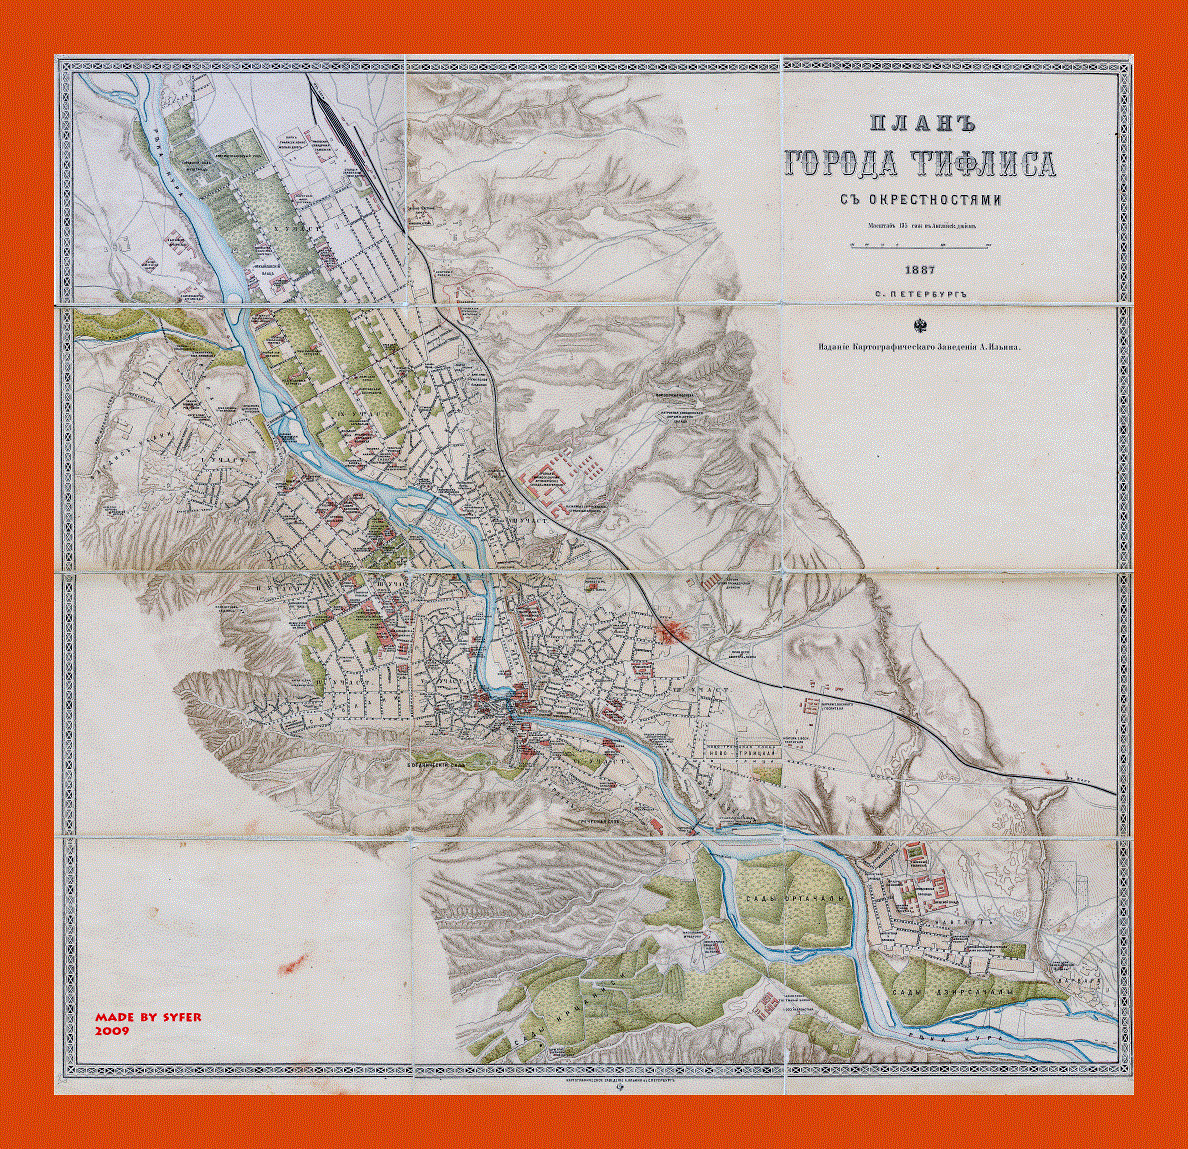 Old map of Tbilisi city - 1887